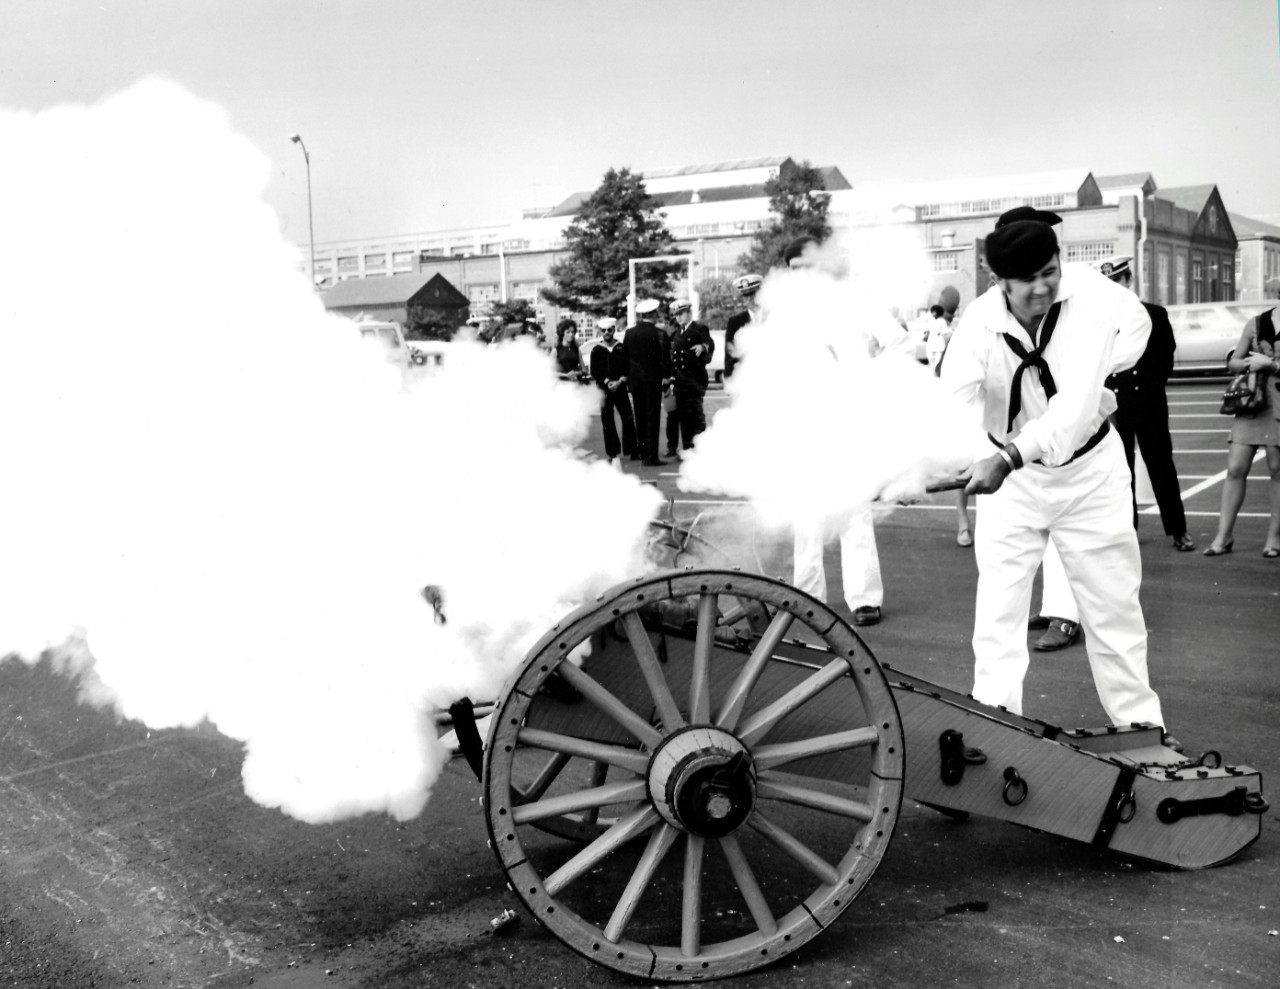 NMUSN-41: Replica Cannons fired for 25th Anniversary of the Navy Museum, October 1987. In celebration of the 25th Anniversary, replica cannons are fired towards the Anacostia River, Washington Navy Yard, Washington, D.C. National Museum of the U....